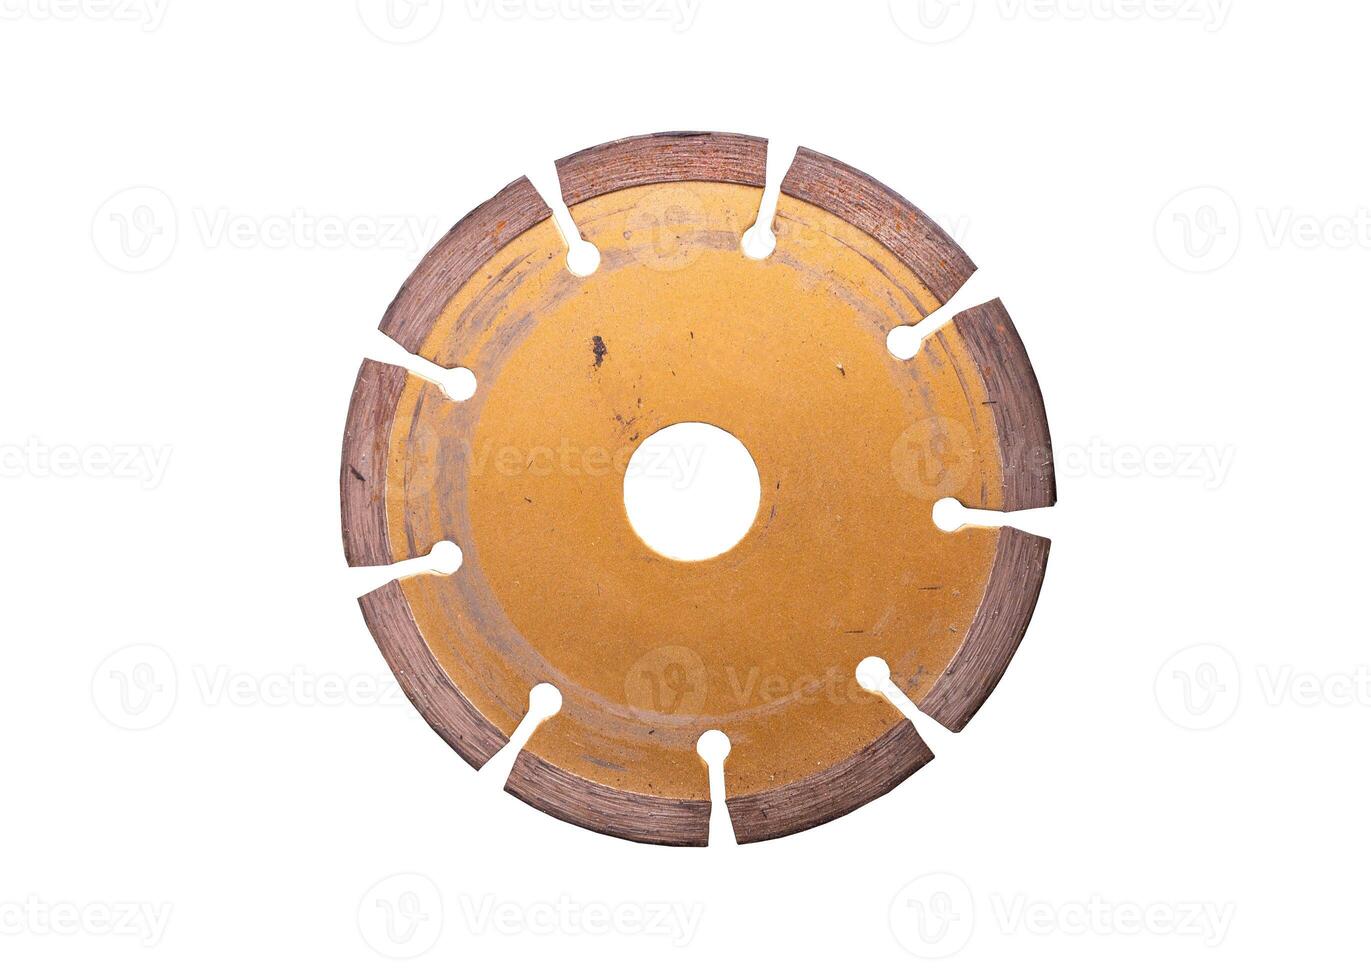 Circular saw blade isolated on white background with car clutch disc, metal chip photo